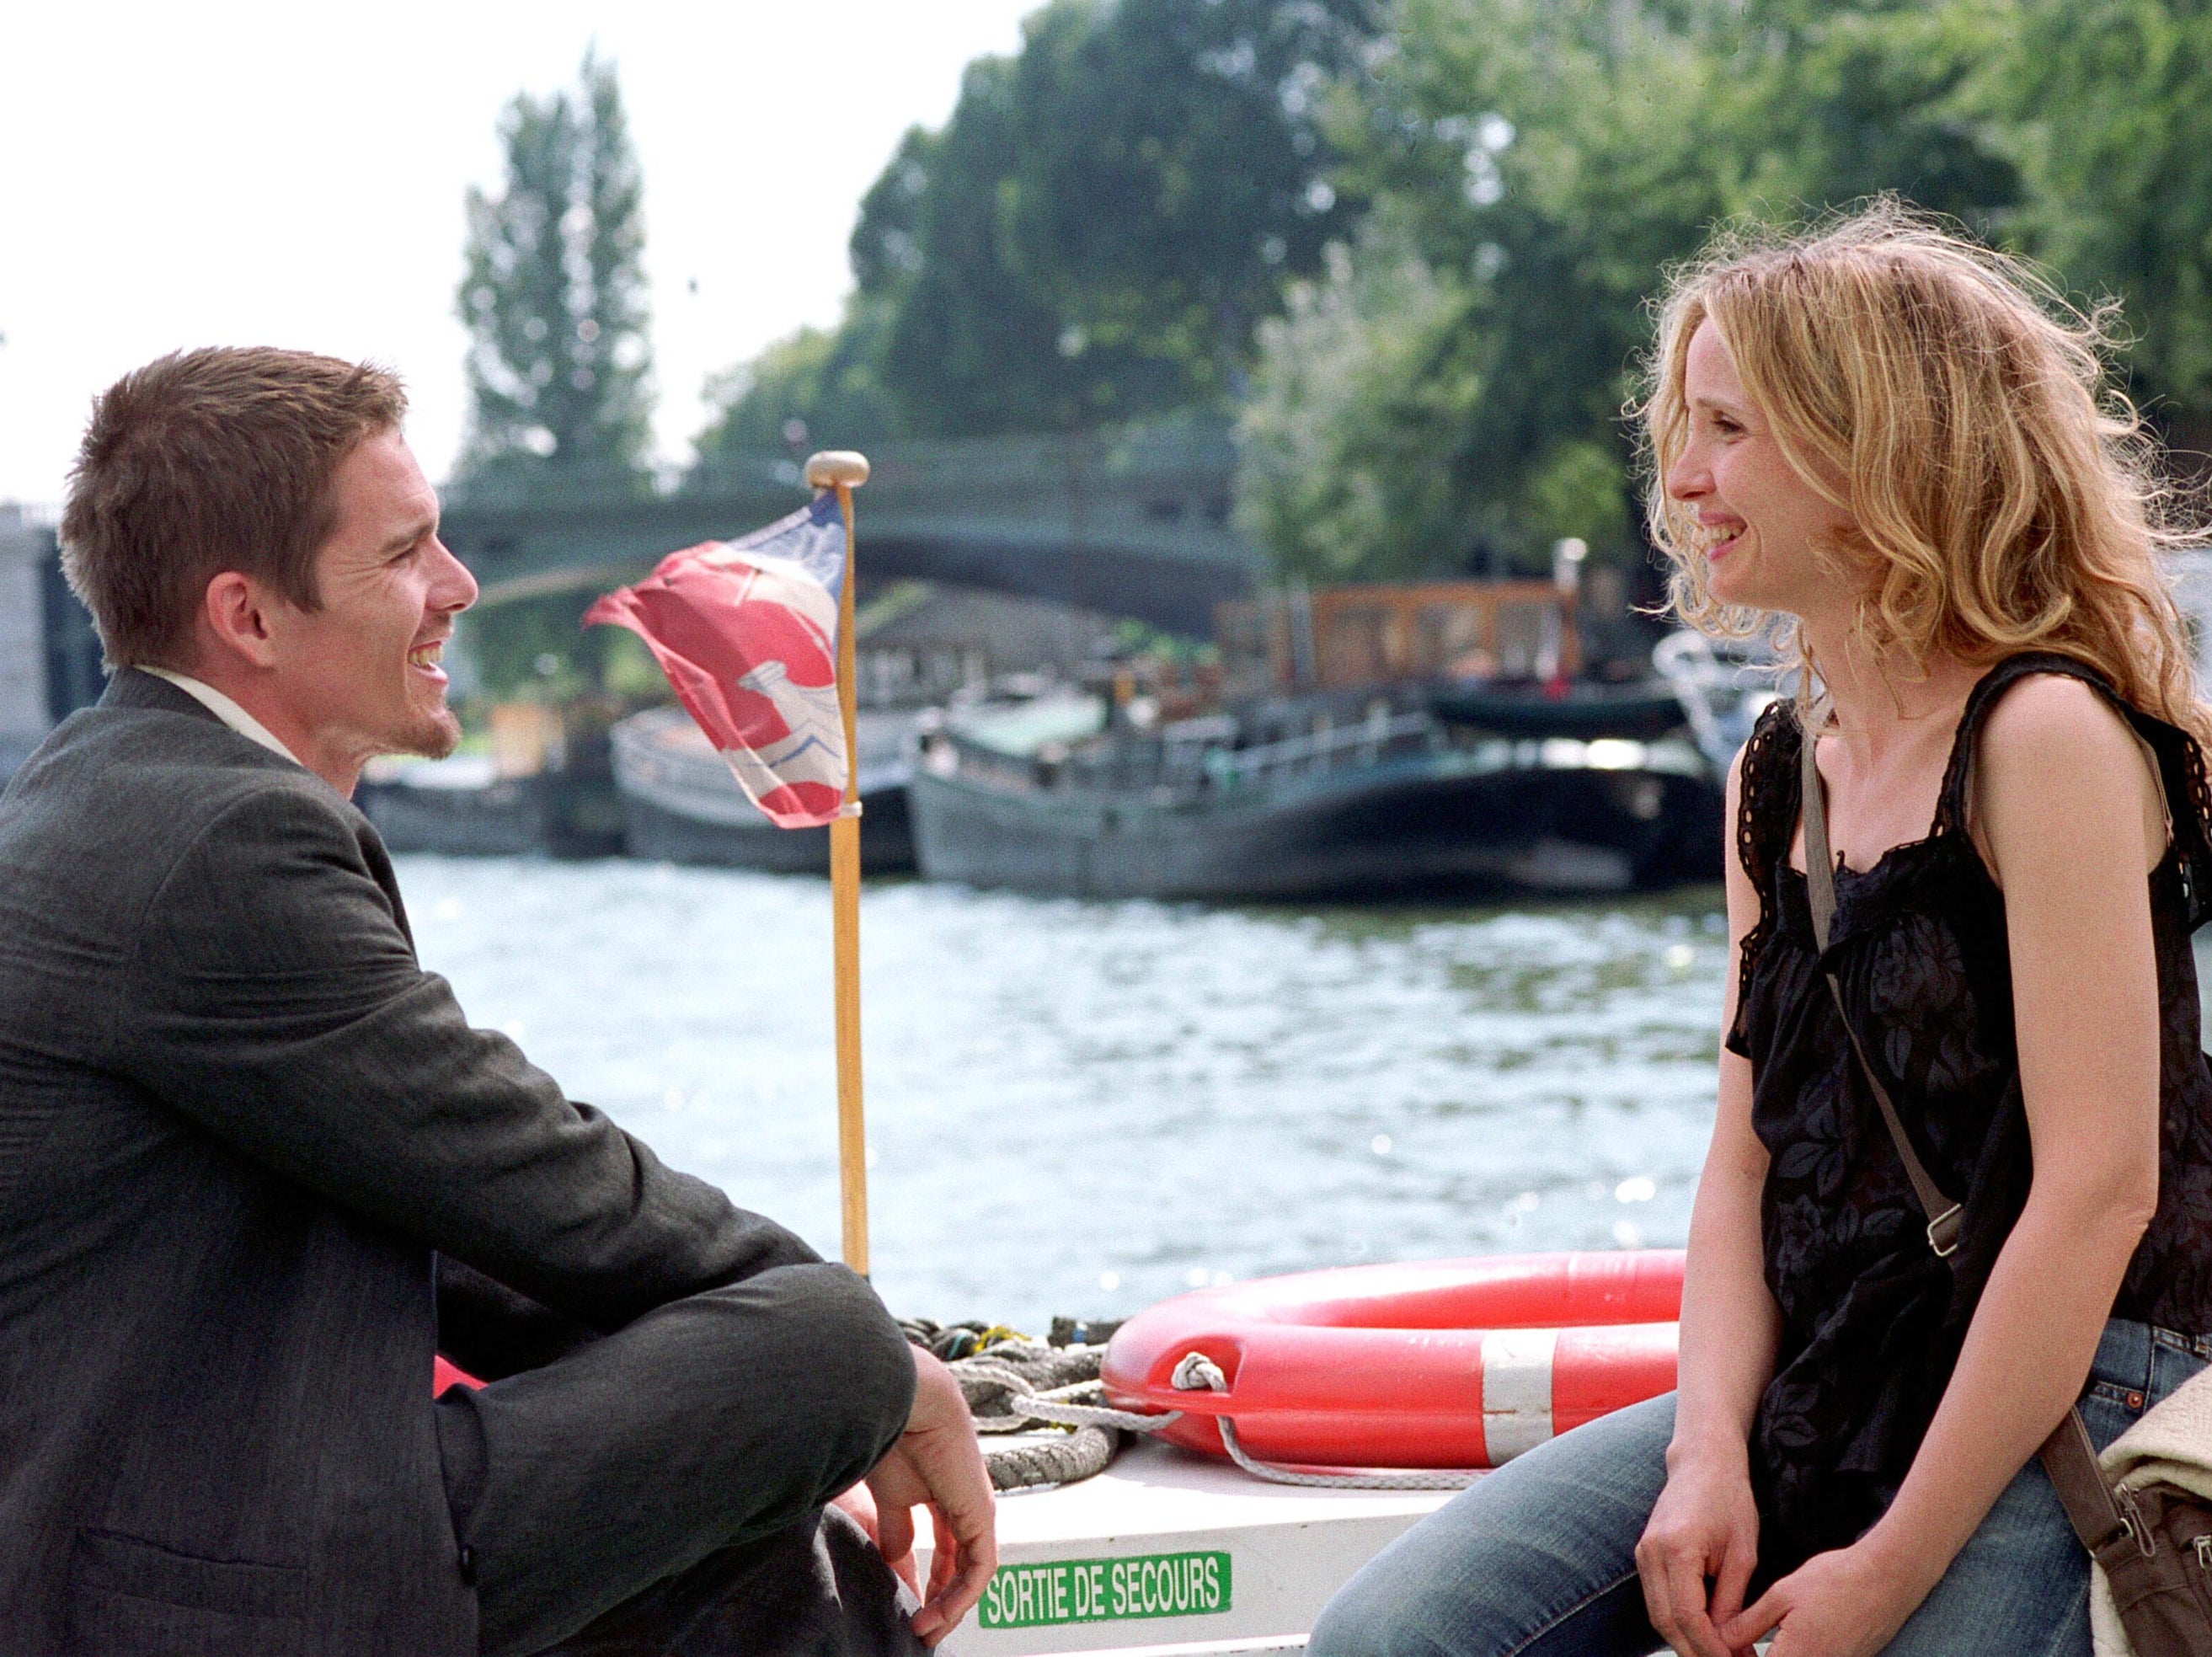 Lovers on the Seine: Ethan Hawke and Julie Delpy in ‘Before Sunset’